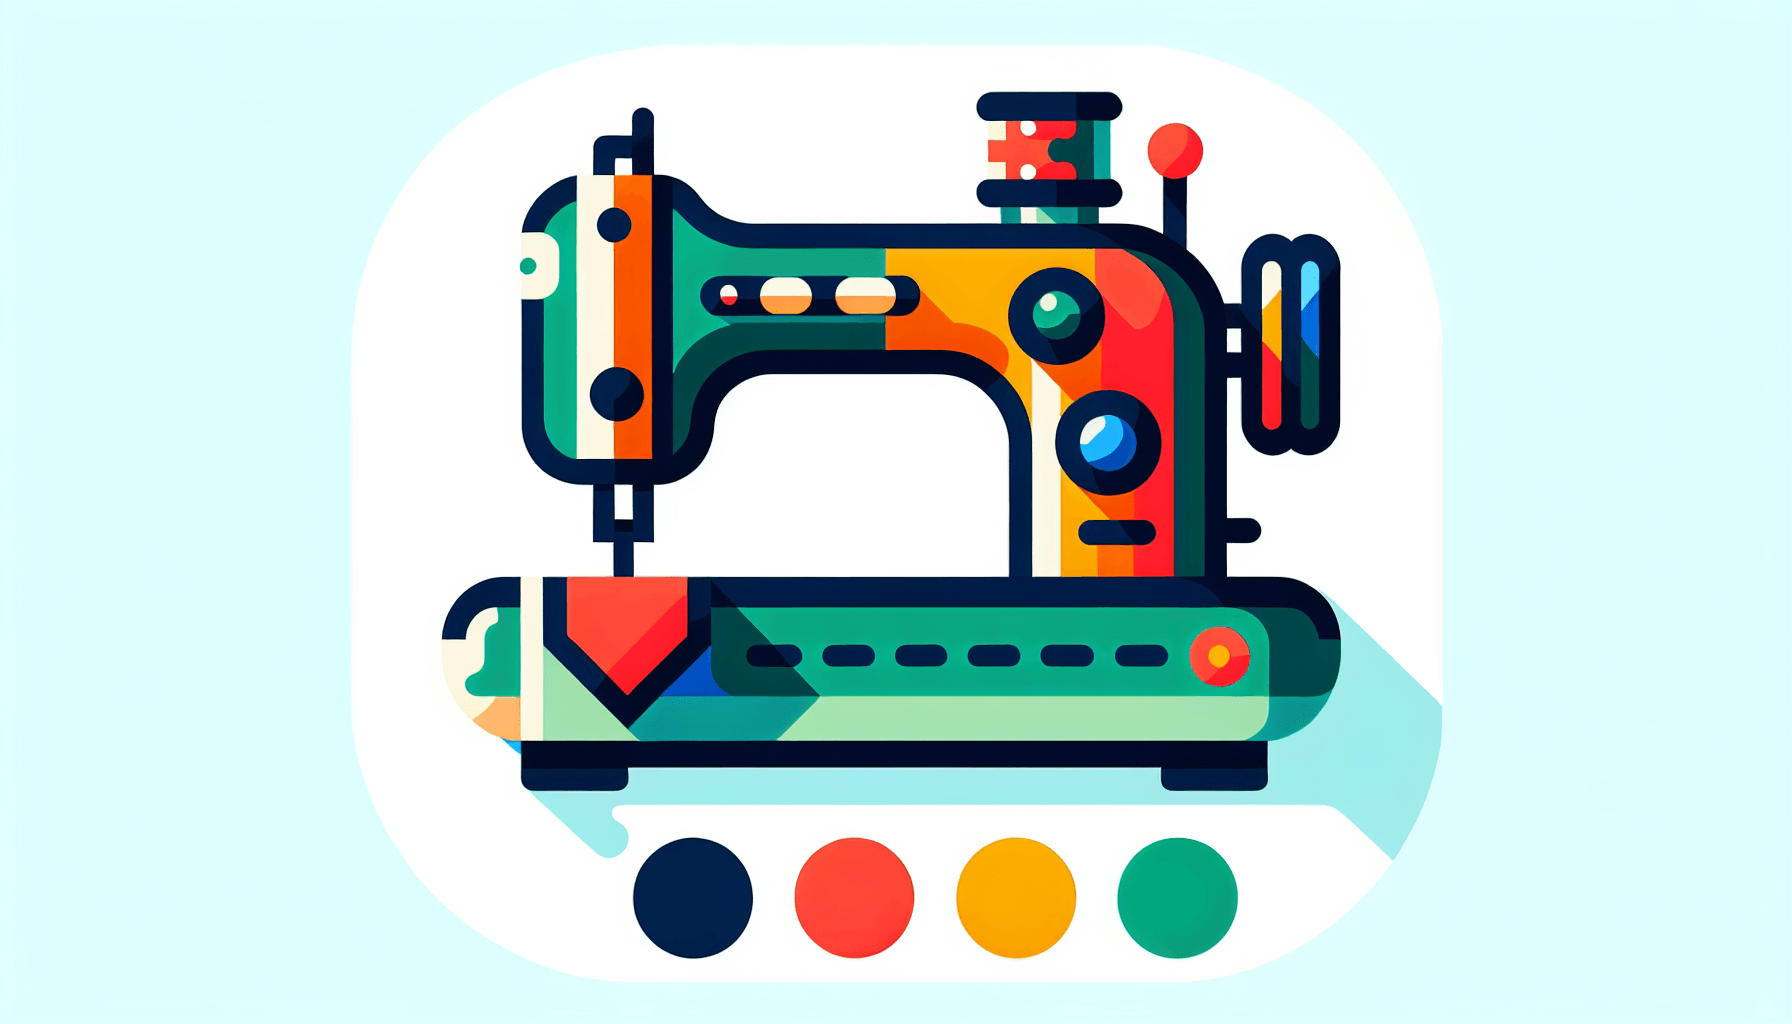 Sewing machine in flat illustration style and white background, red #f47574, green #88c7a8, yellow #fcc44b, and blue #645bc8 colors.